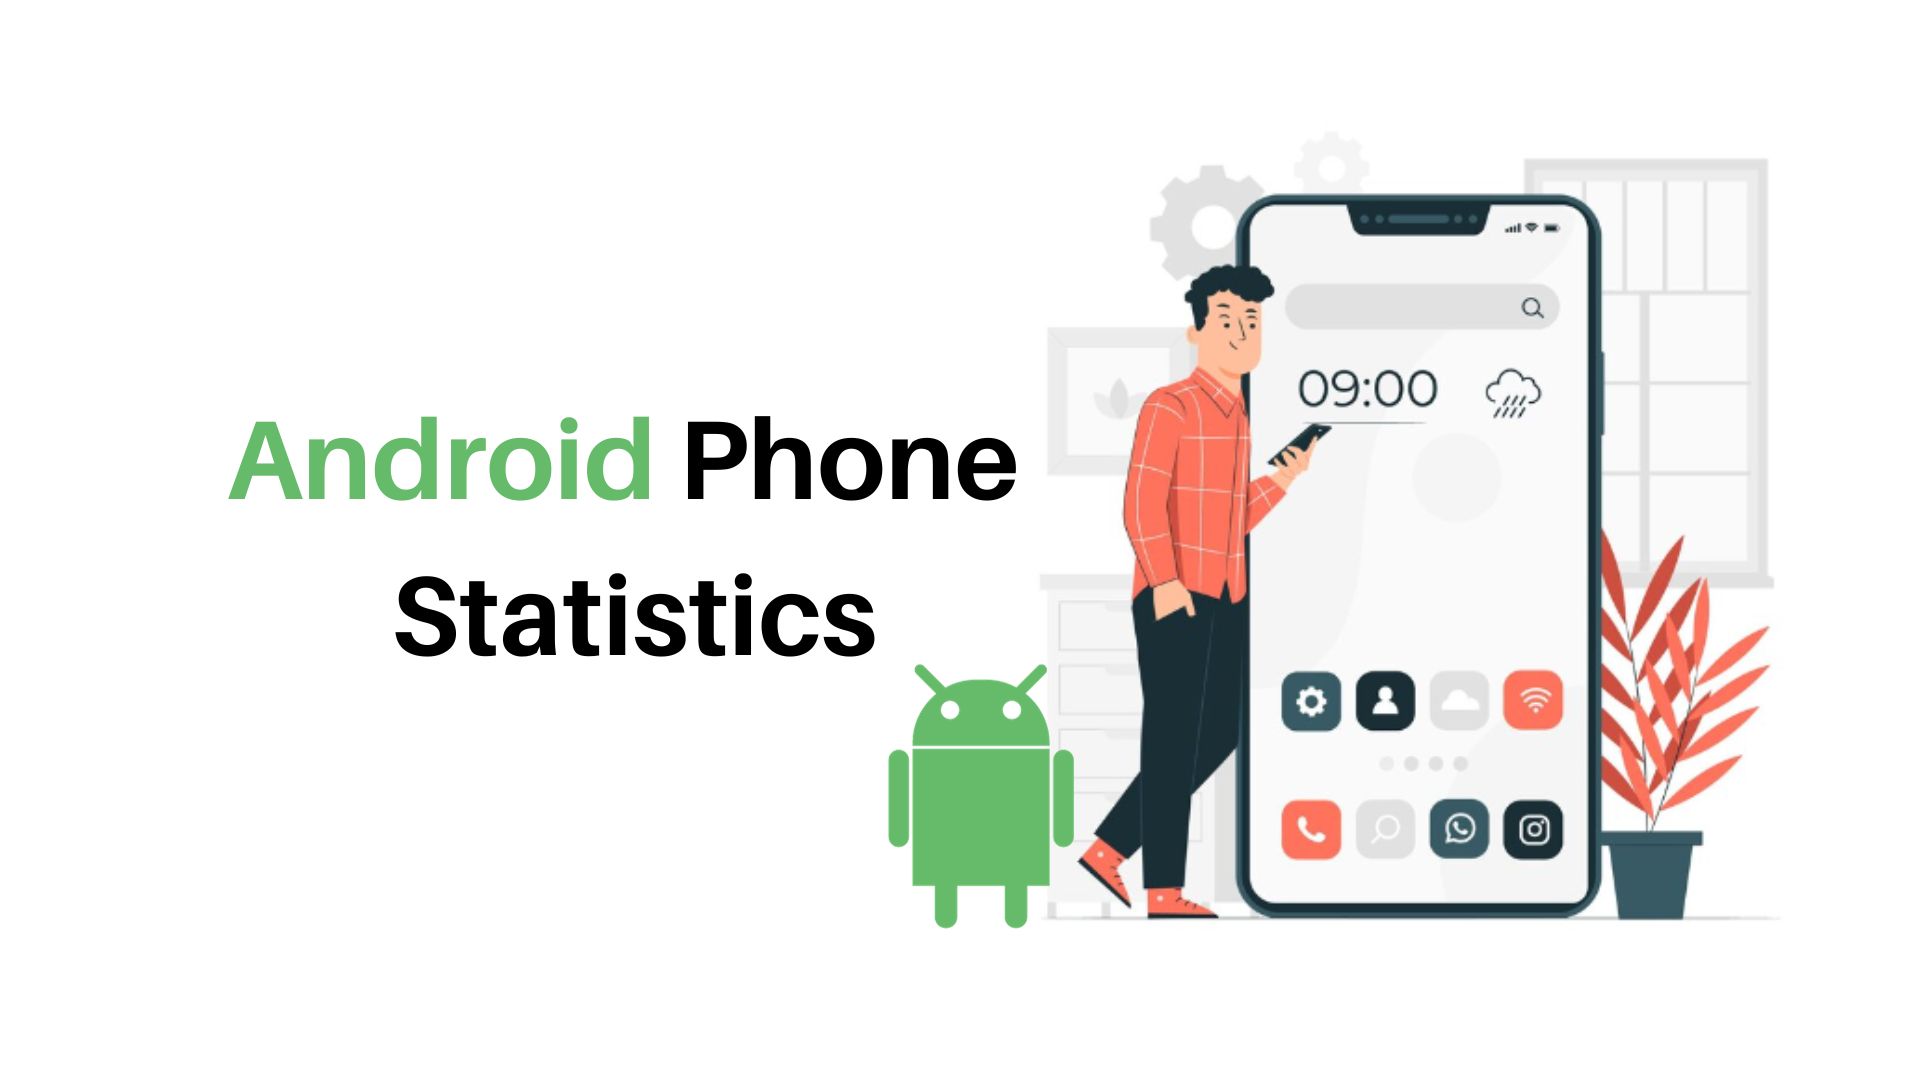 Fami Mart App Stats: Downloads, Users and Ranking in Google Play